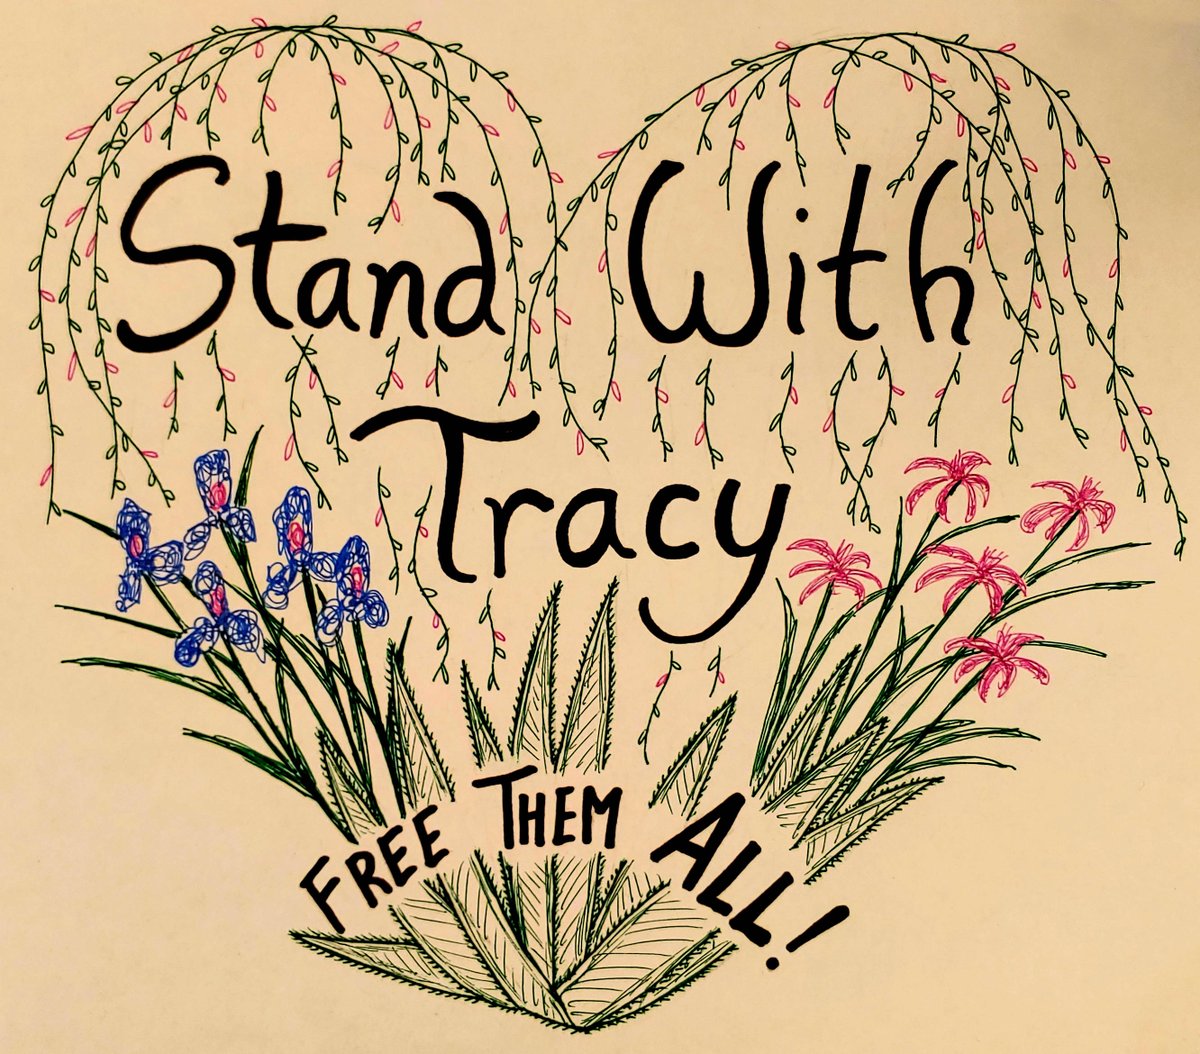 90% of incarcerated women are survivors of gender violence. This Black History Month, we need to end anti-Black and gender-based violence and stop the criminalization of Black women survivors like Tracy. bit.ly/3HWPtQ8 #DropHerCharges #StandWithTracy